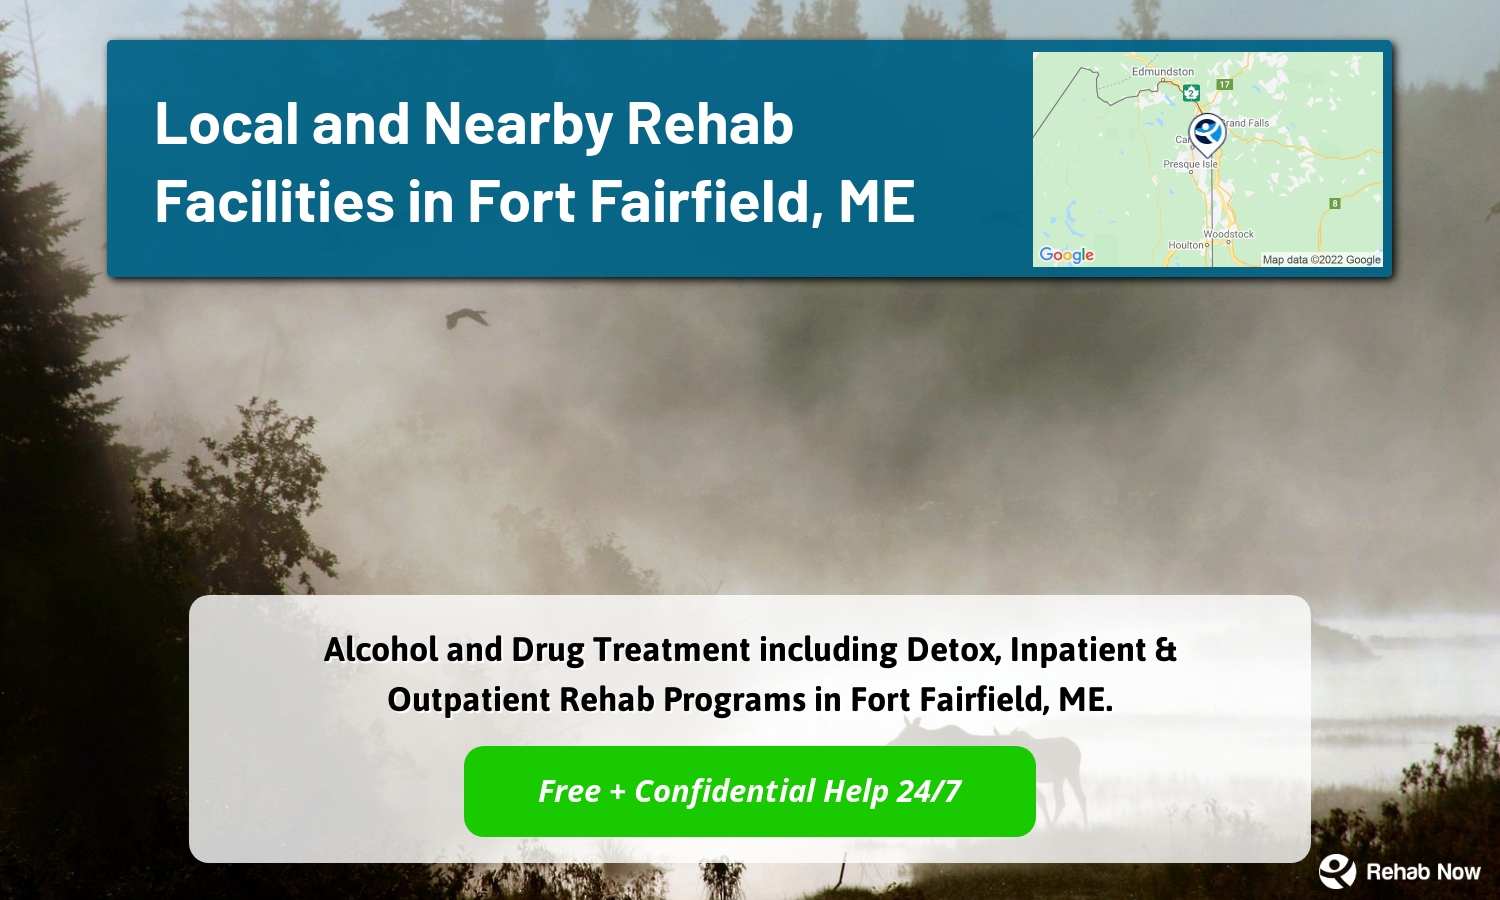 Alcohol and Drug Treatment including Detox, Inpatient & Outpatient Rehab Programs in Fort Fairfield, ME.